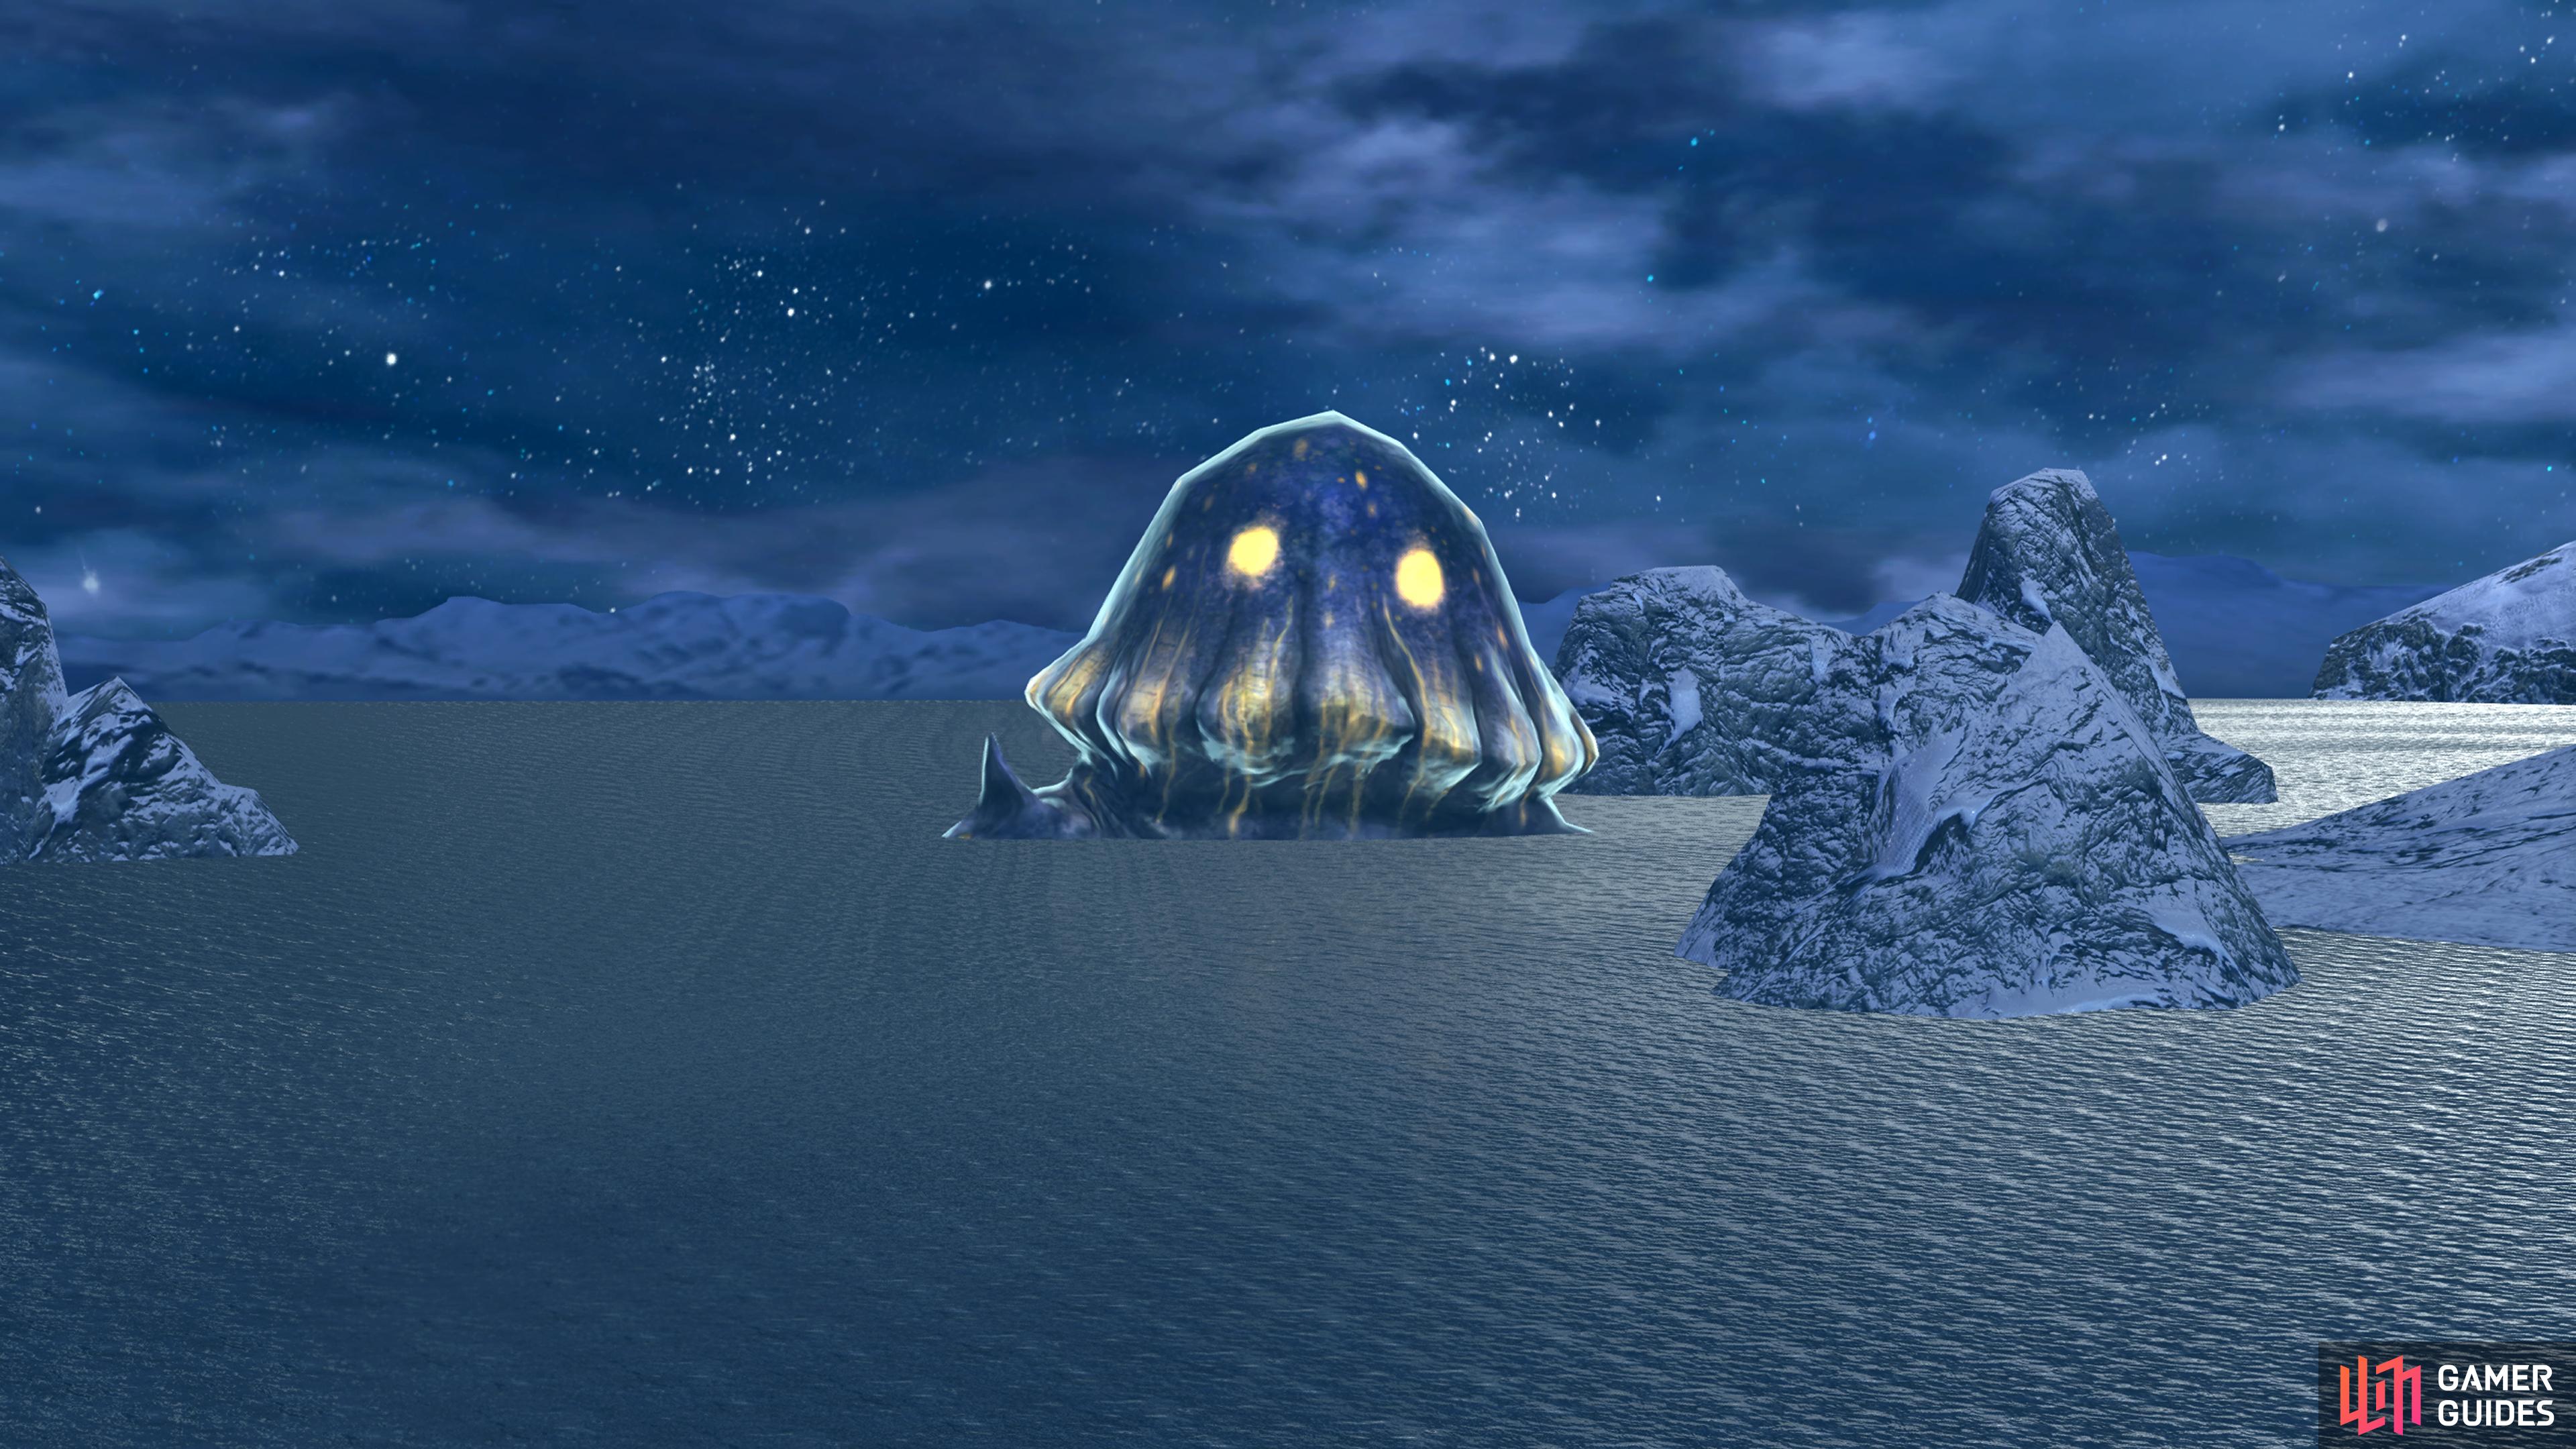 The Monksnail travels slowly from your right to your left between the icebergs in Frost Islands. It only appears at night, so make sure you choose that when going on the expedition.